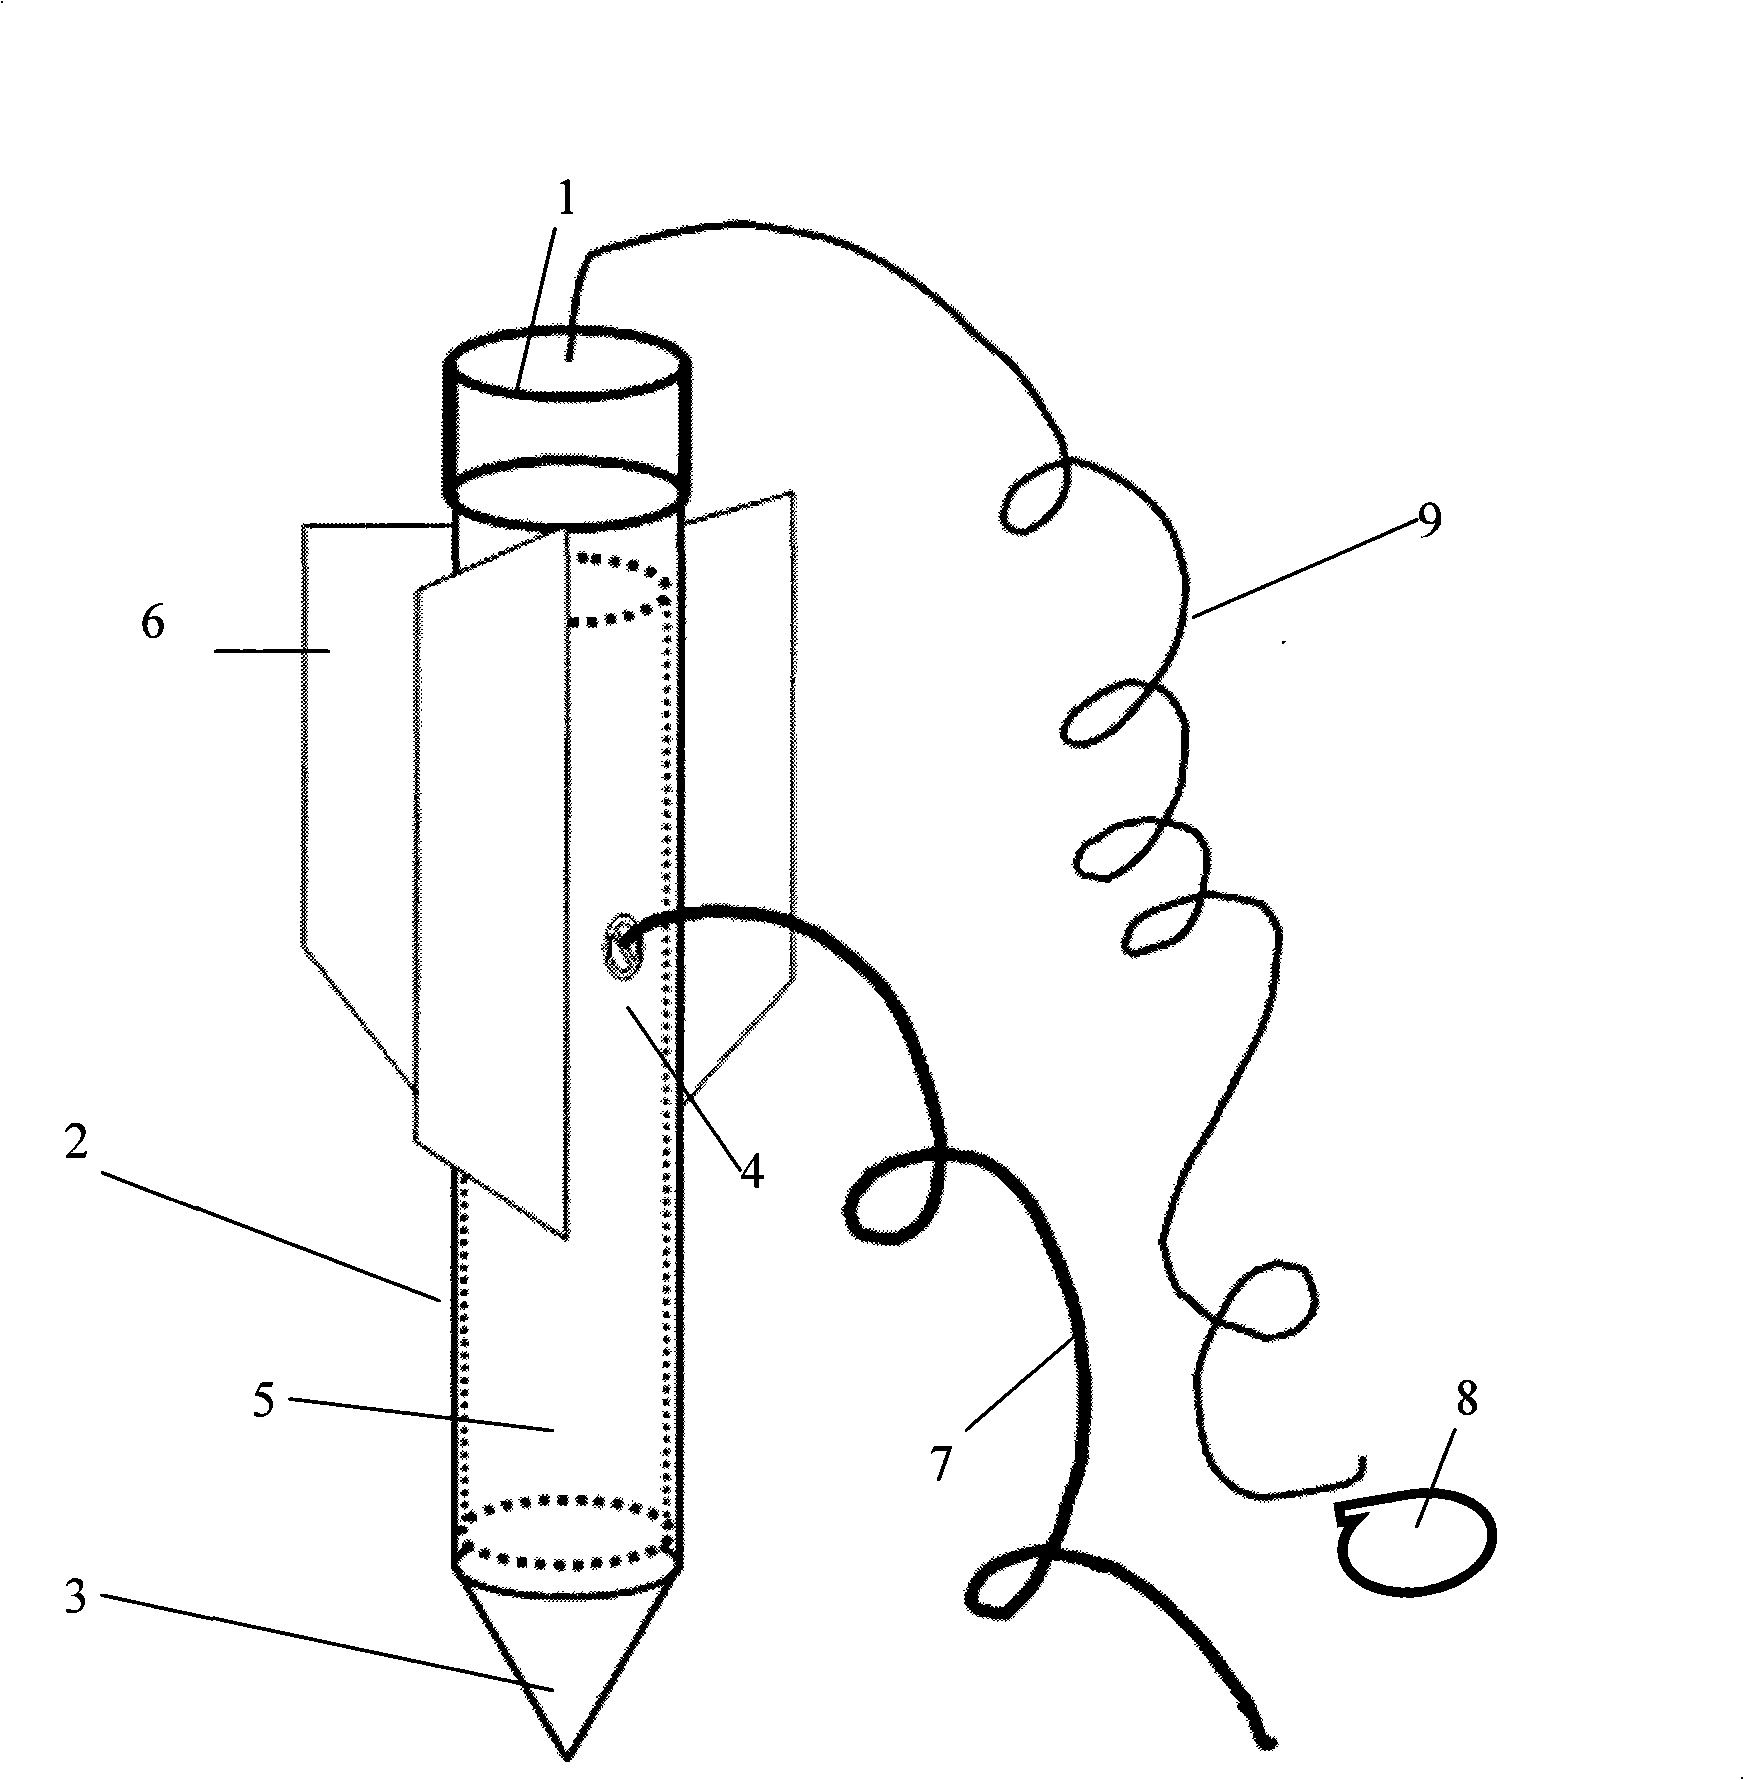 Power embedment anchor with high-frequency small amplitude vibration